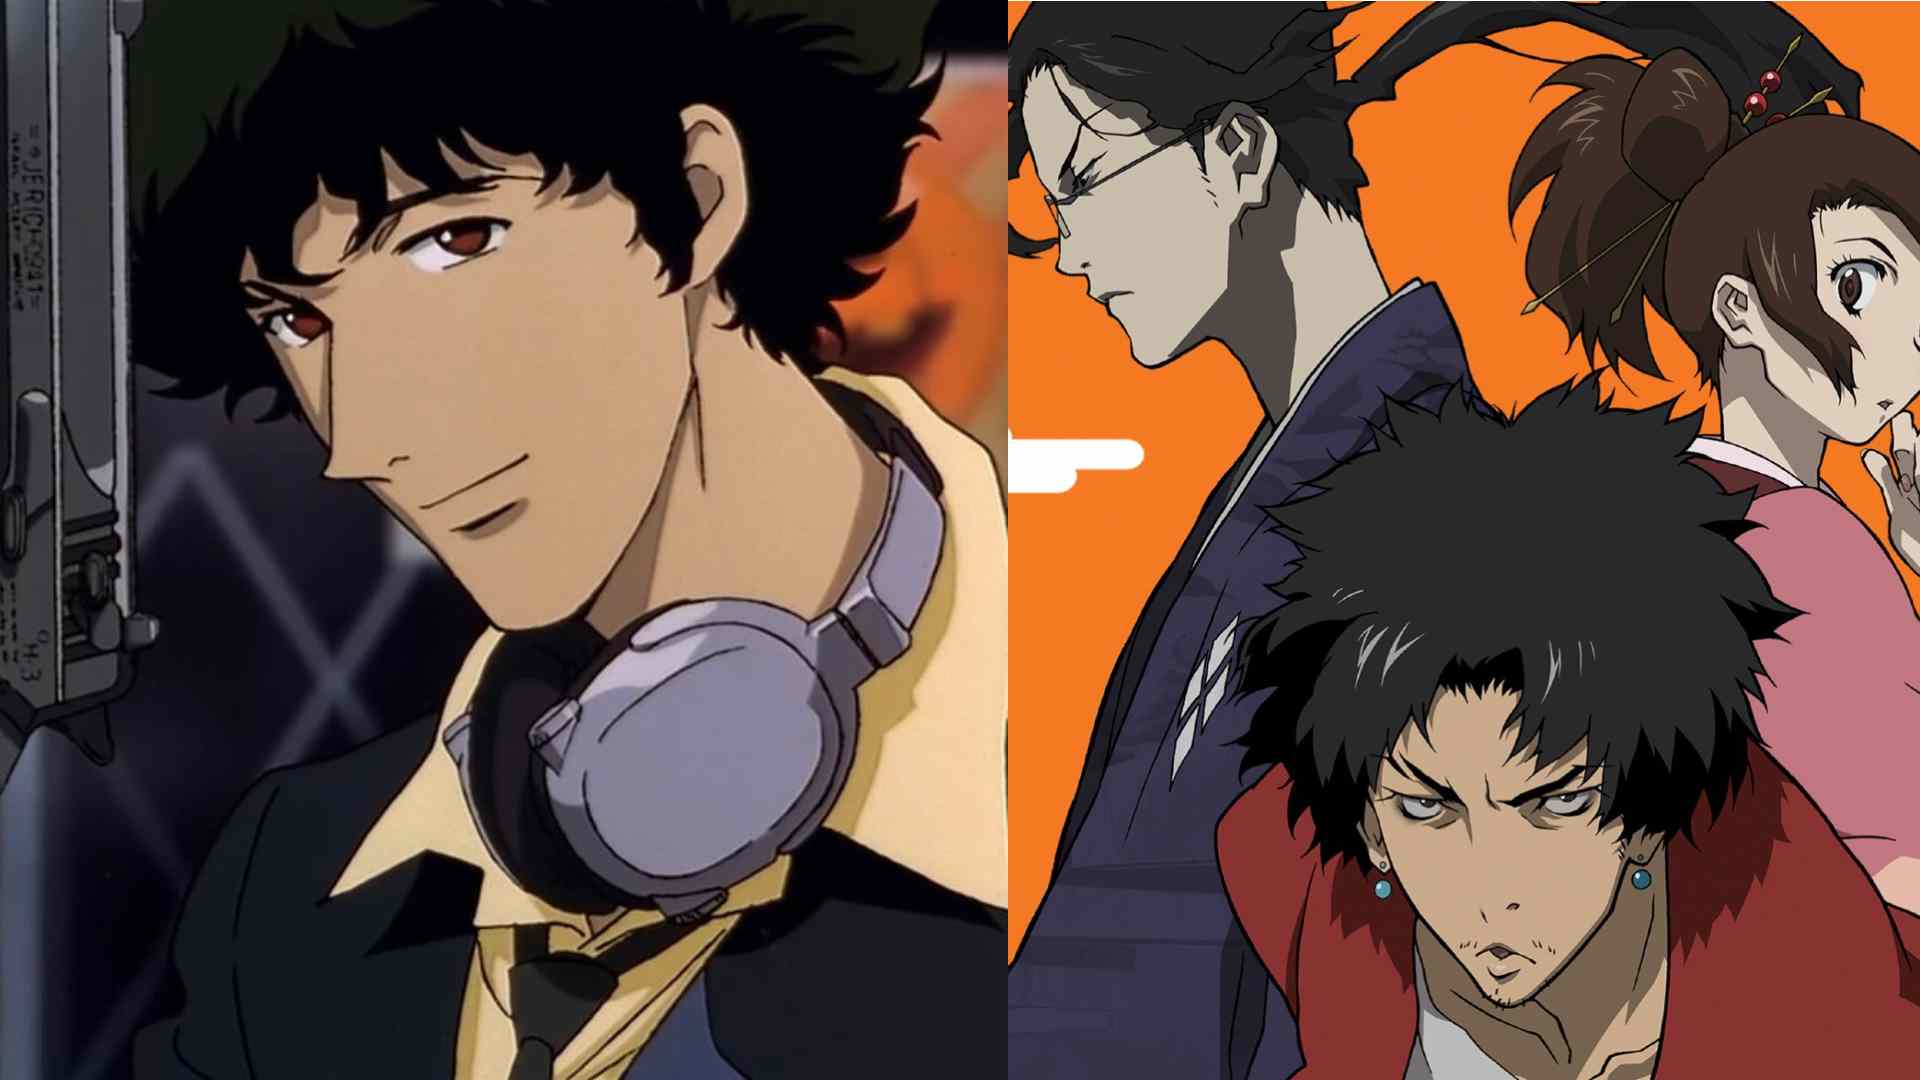 Cowboy Bebop’s Director Returns With Studio Mappa For A New Anime